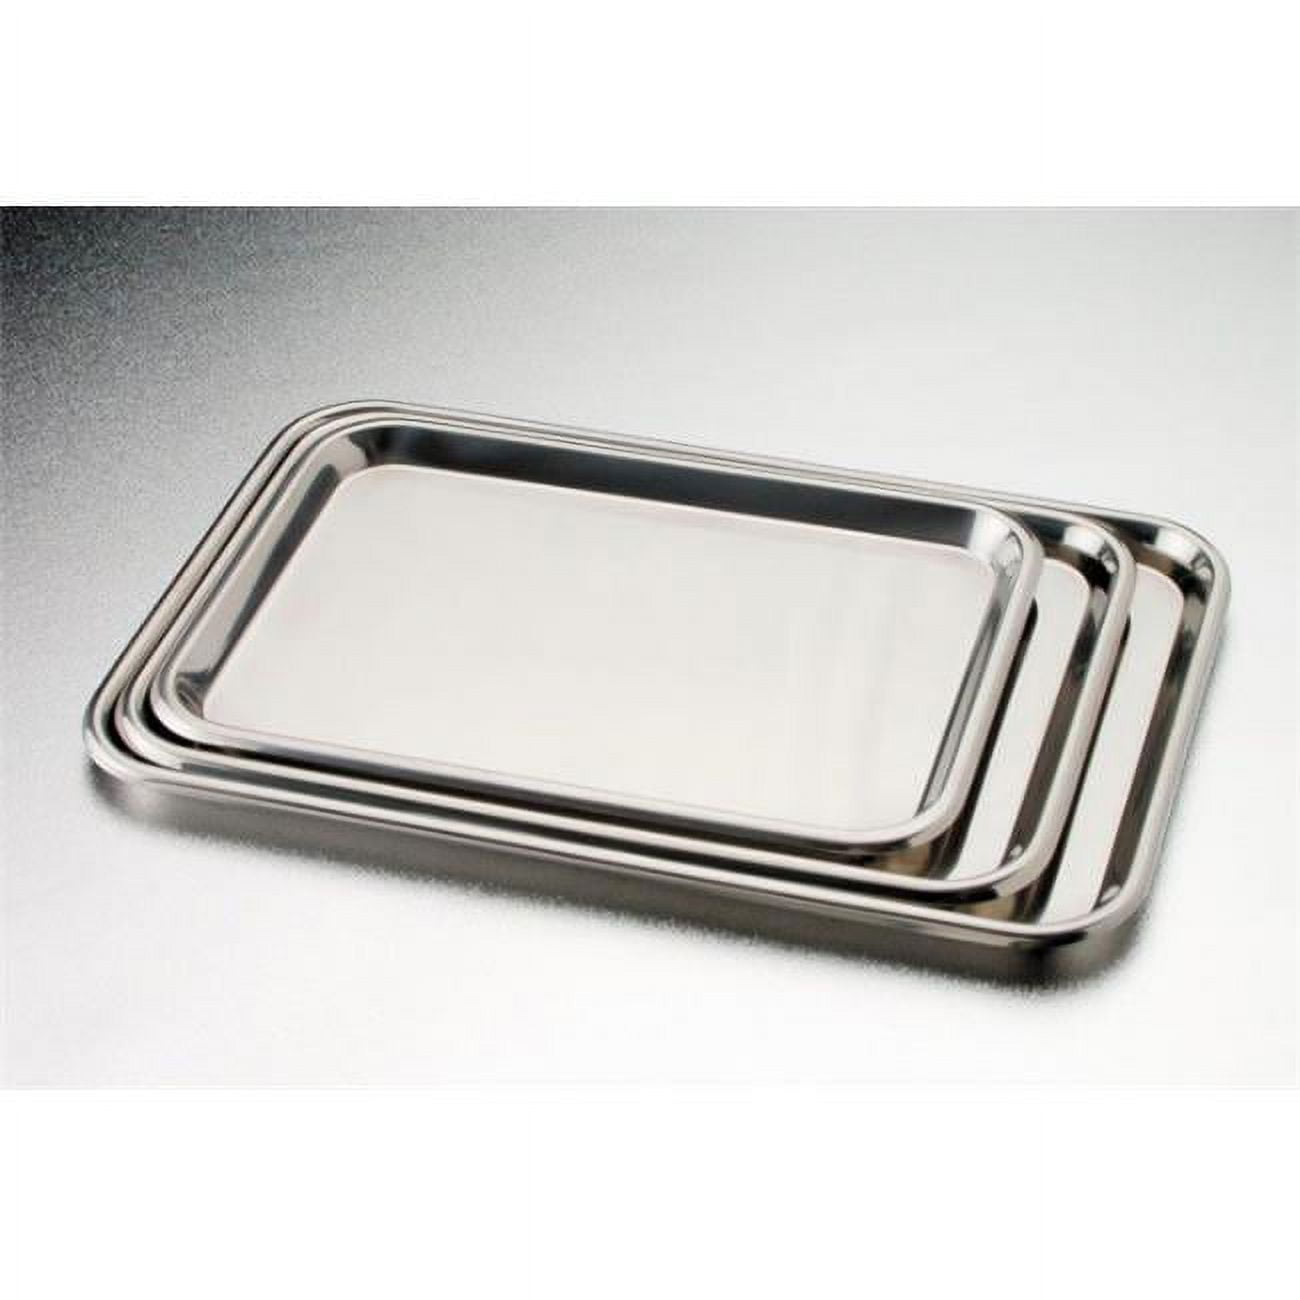 4262 15.125 X 10.5 X 0.625 In. Stainless Steel Instrument Flat Tray